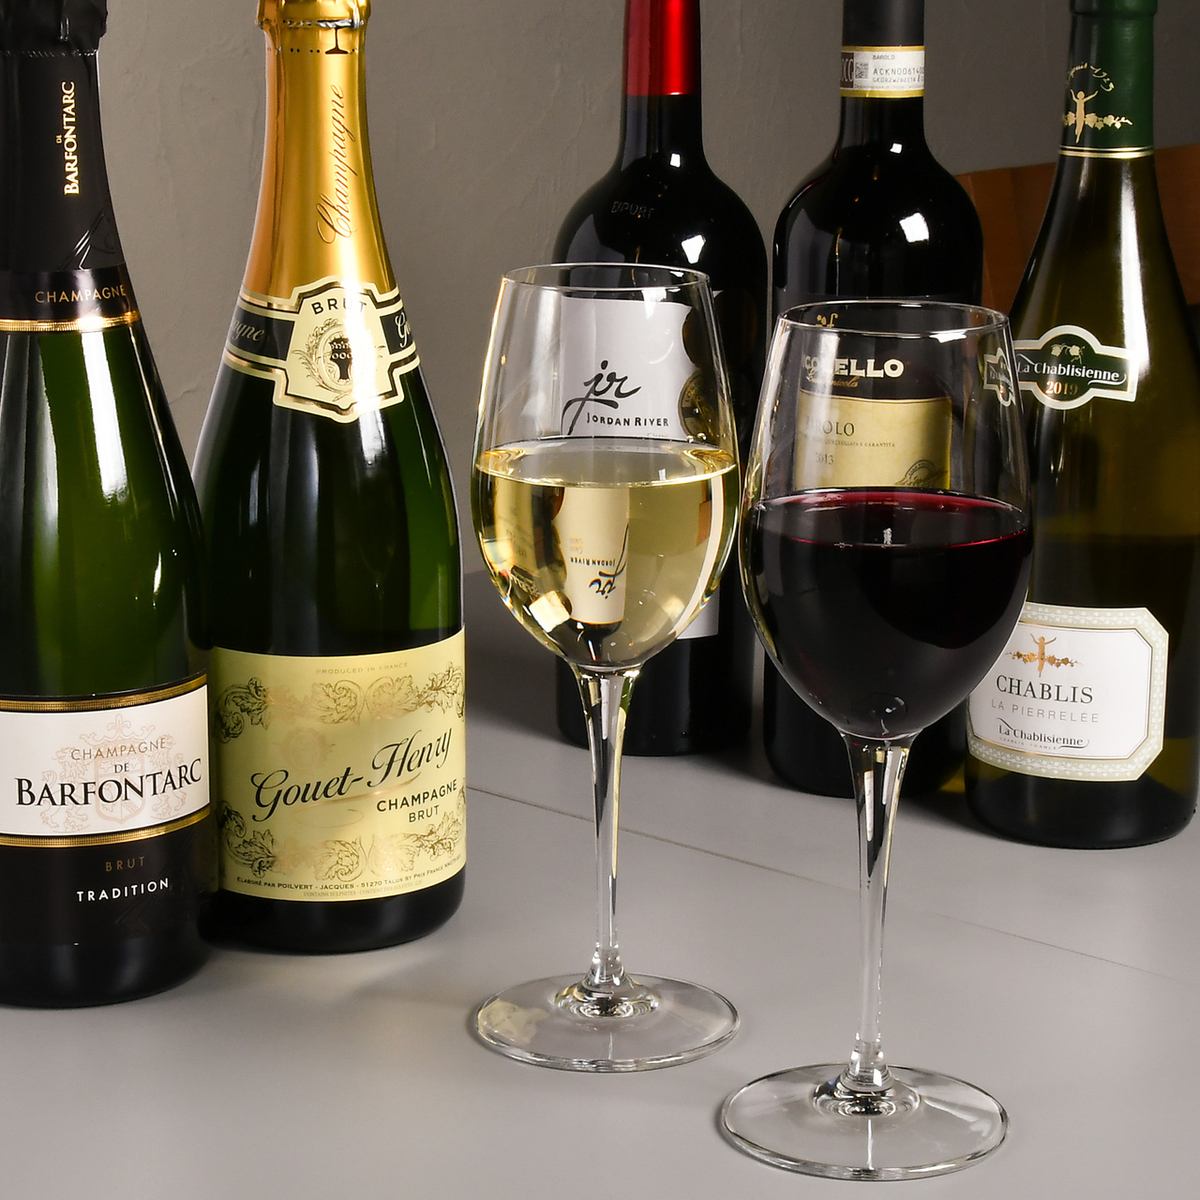 We have a wide variety of wines and champagnes available!